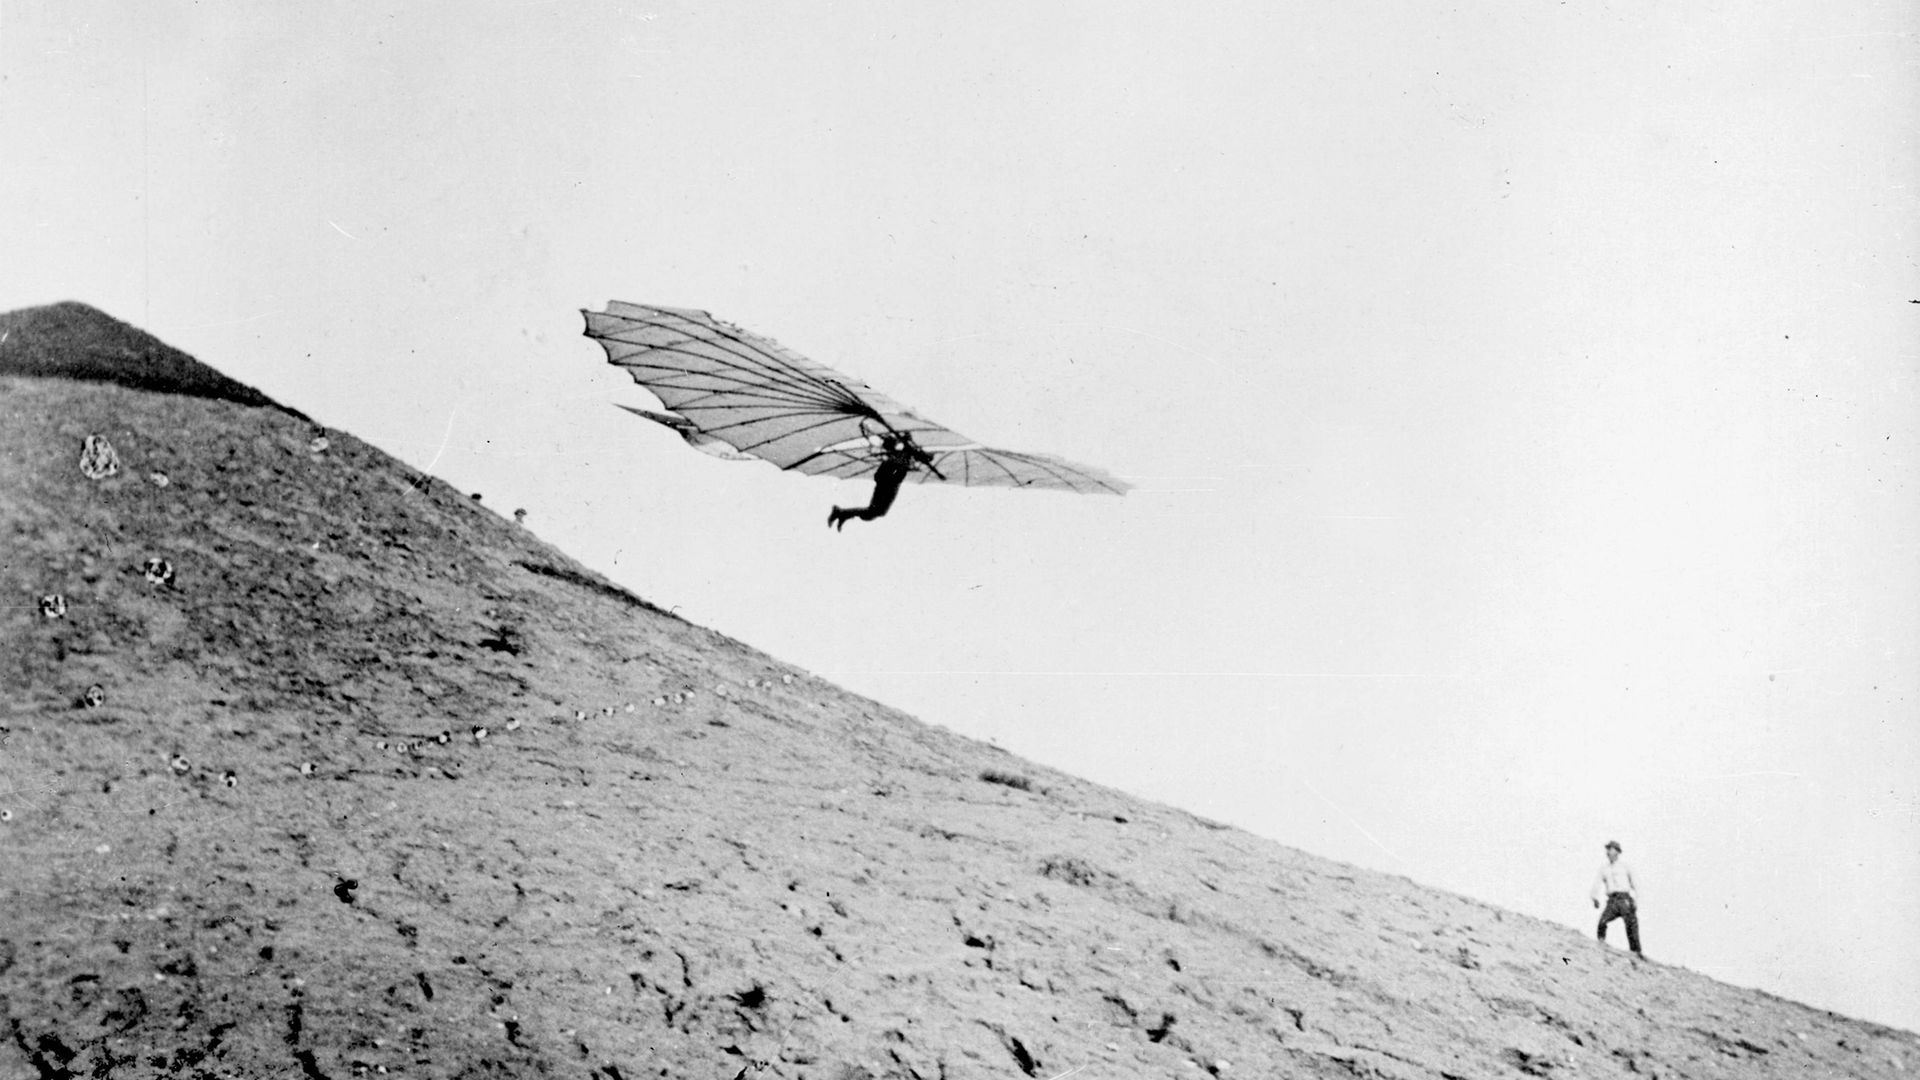 Otto Lilienthal airborne on one of his contraptions - Credit: Roger Viollet via Getty Images